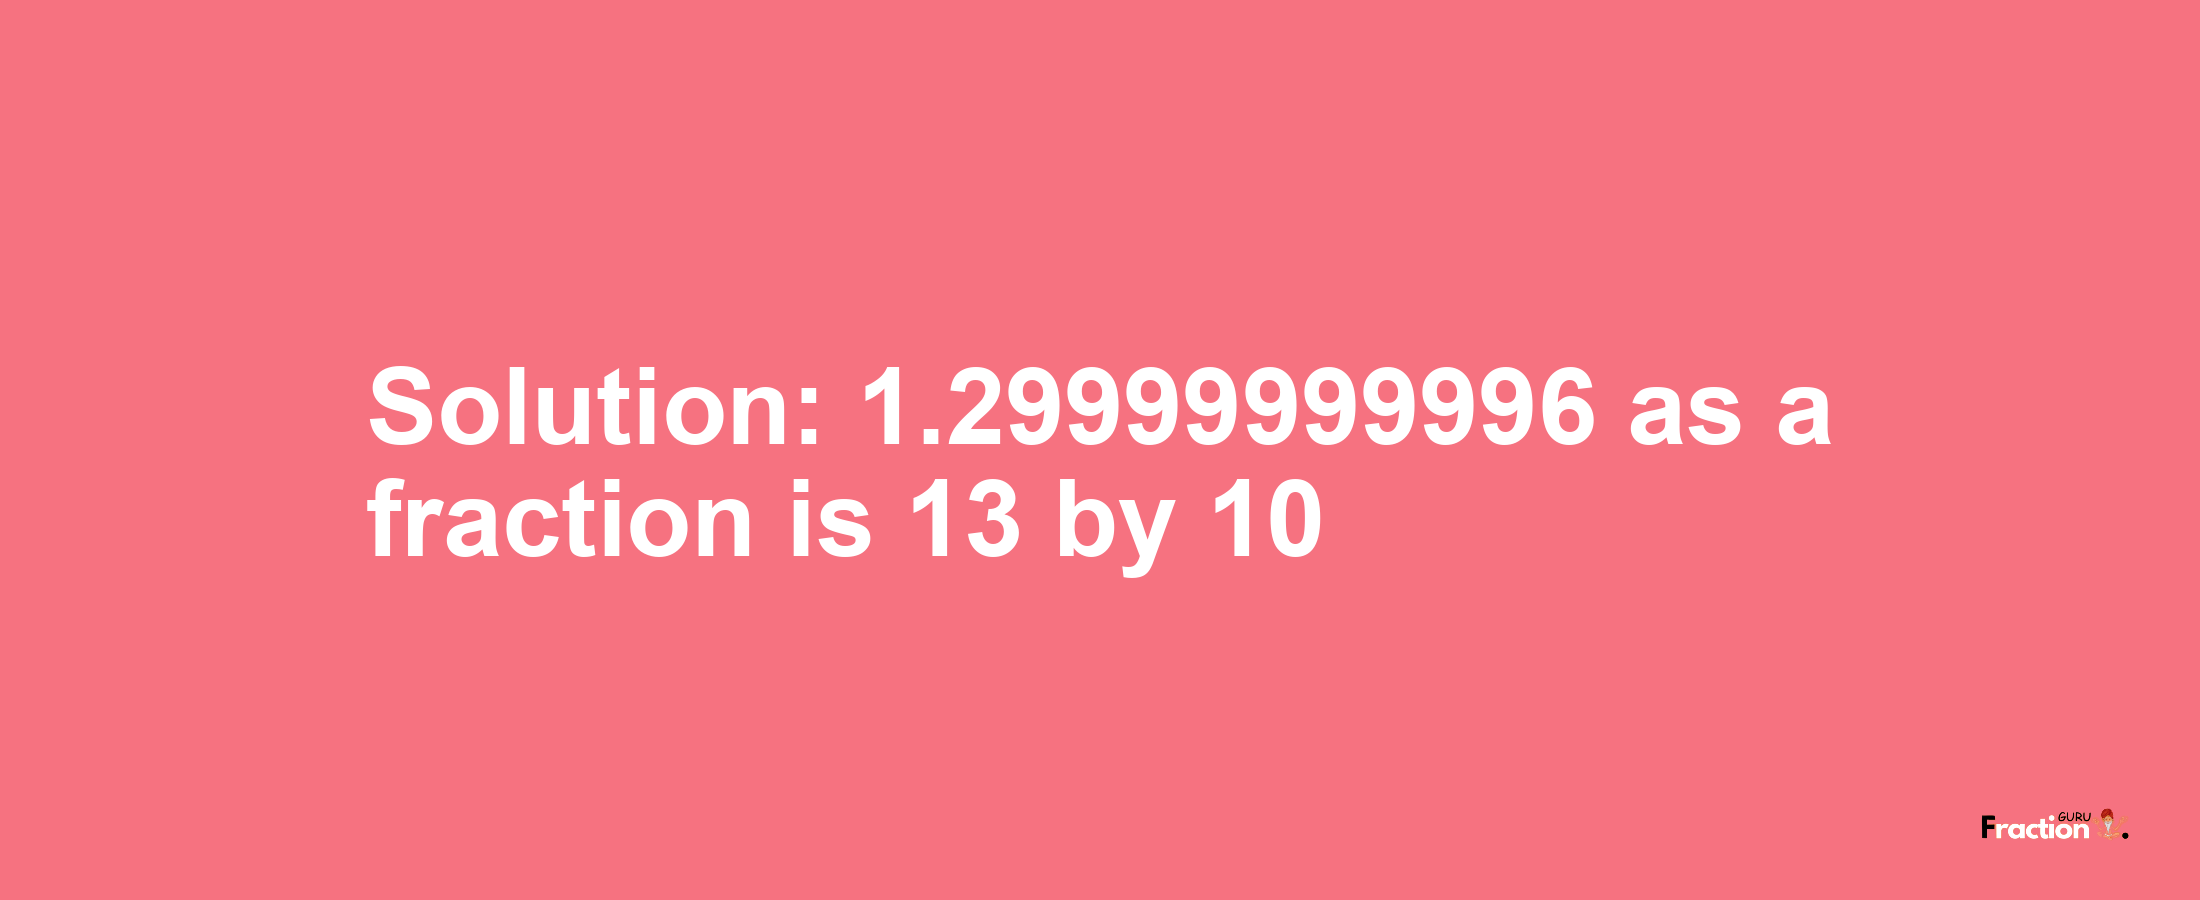 Solution:1.29999999996 as a fraction is 13/10